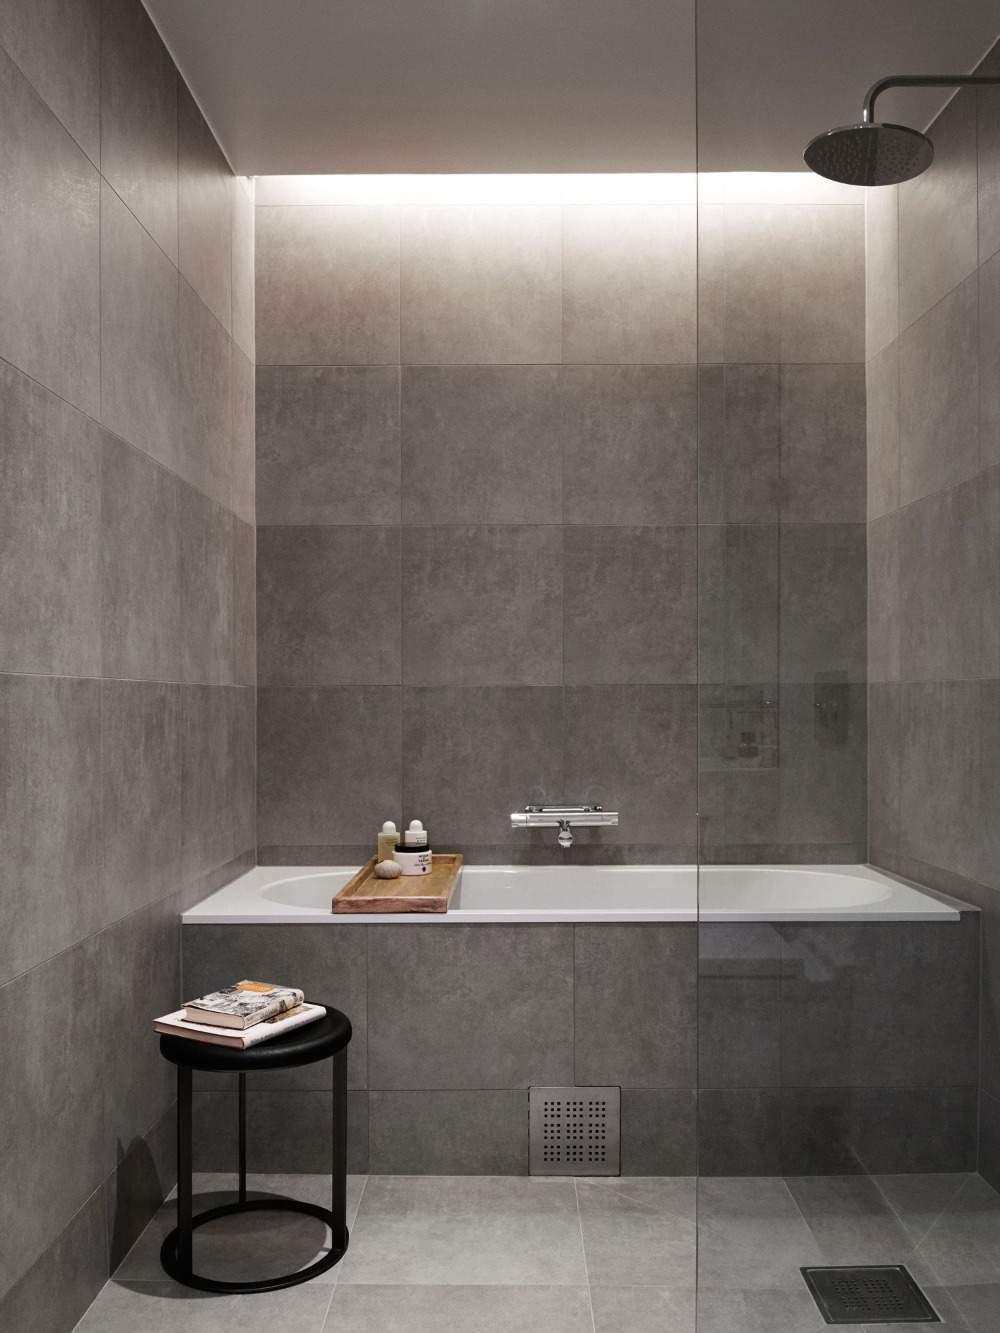 gray small bath lighting in the ceiling over the bathtub with glass wall